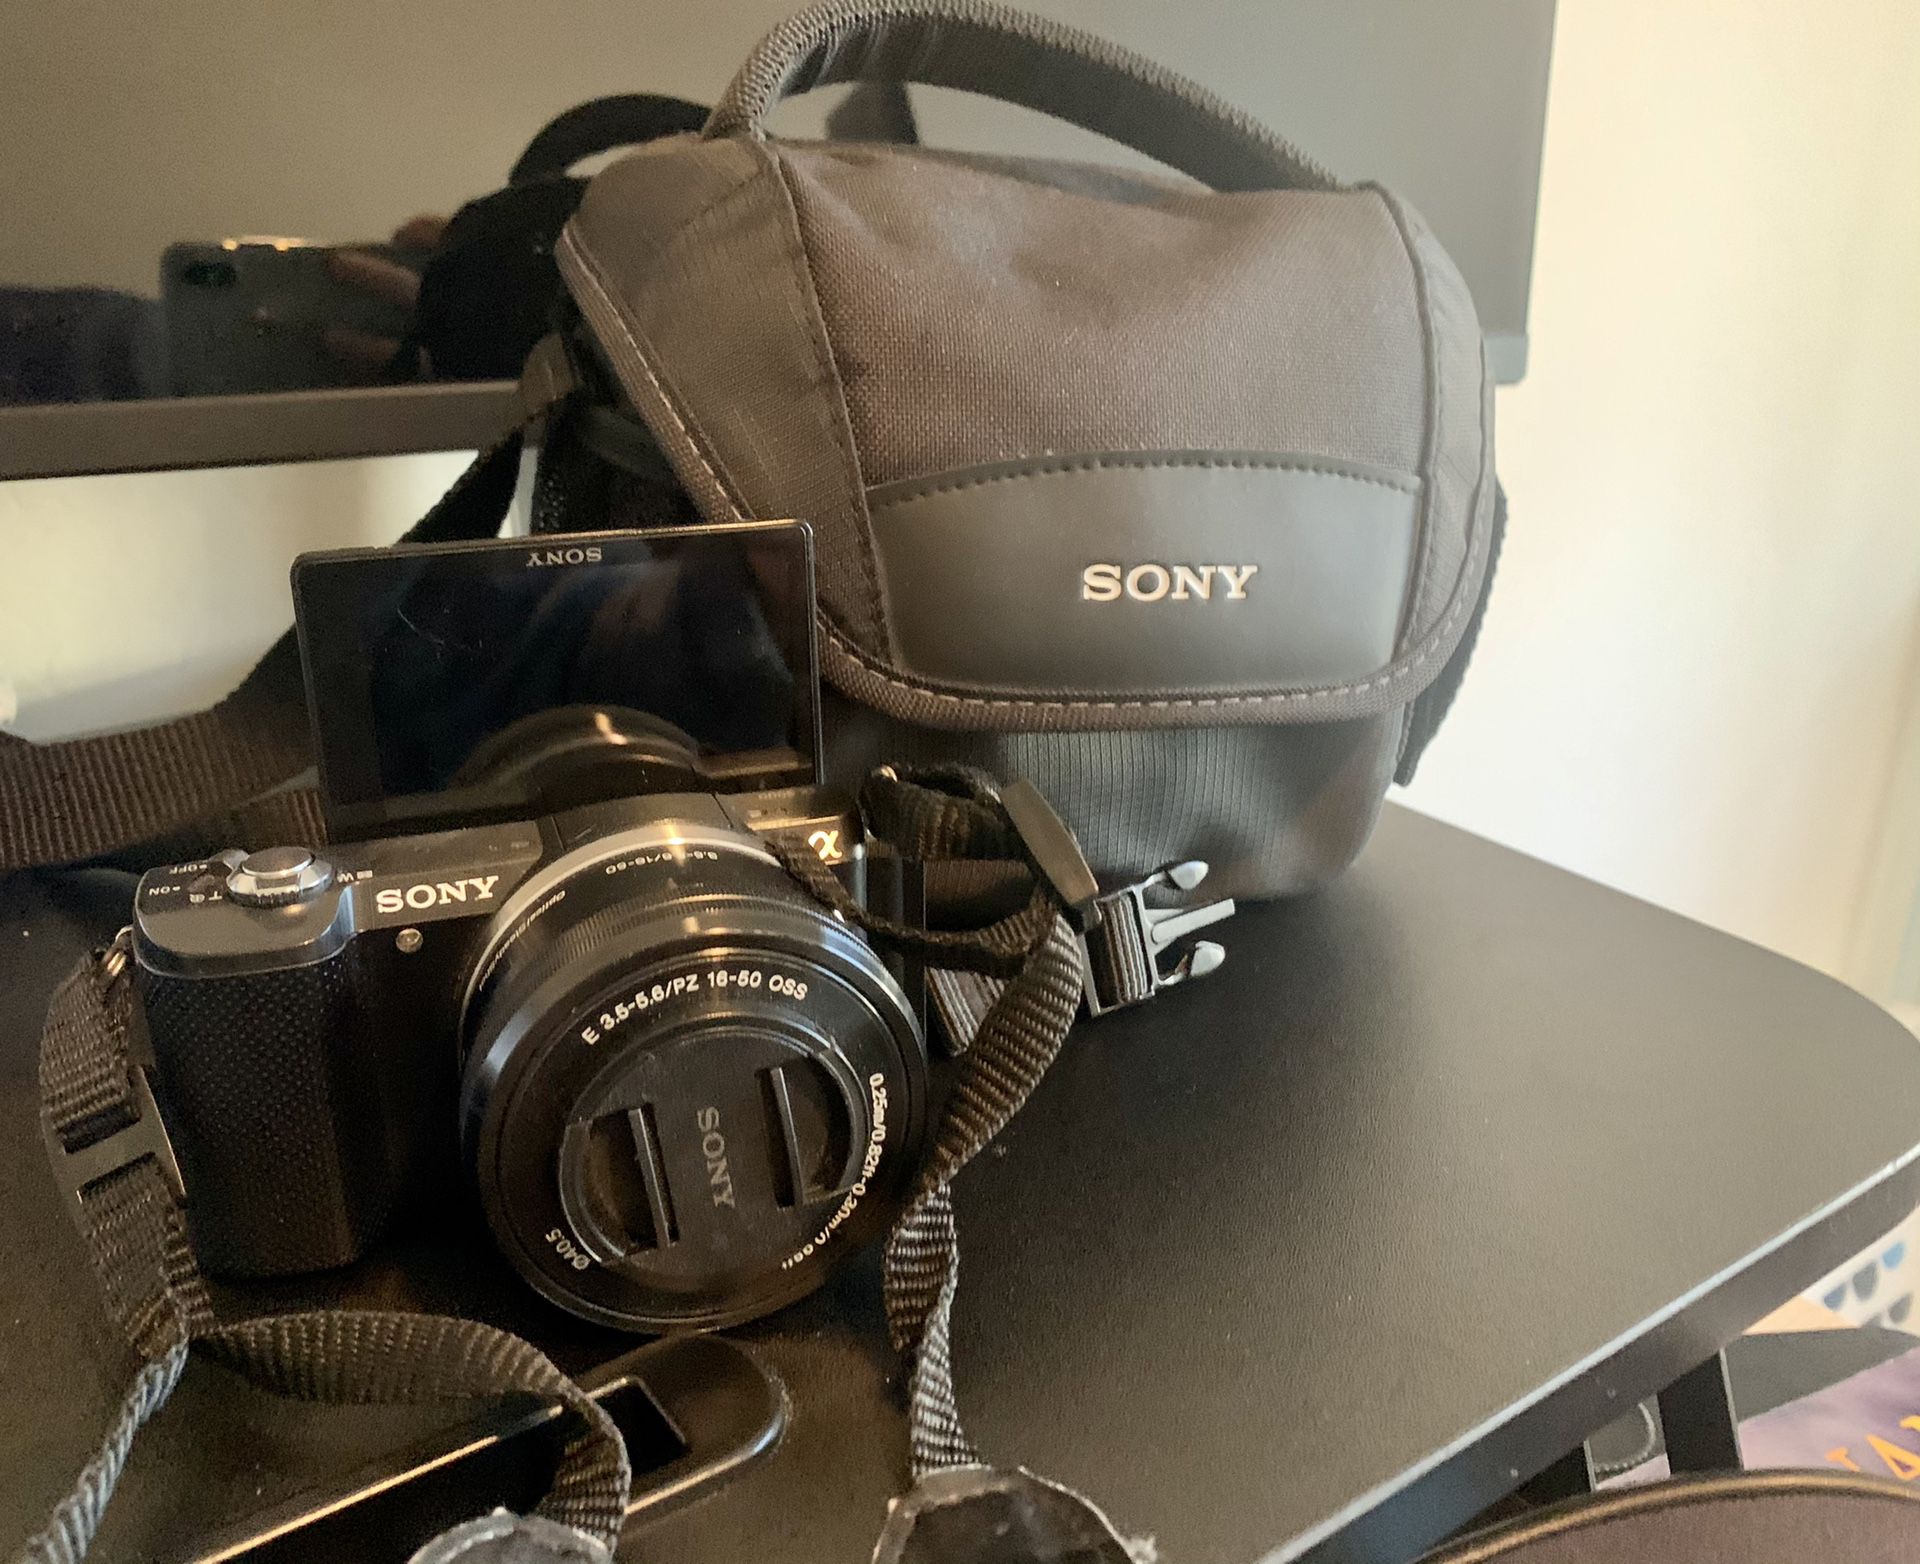 Sony A5000 camera with case